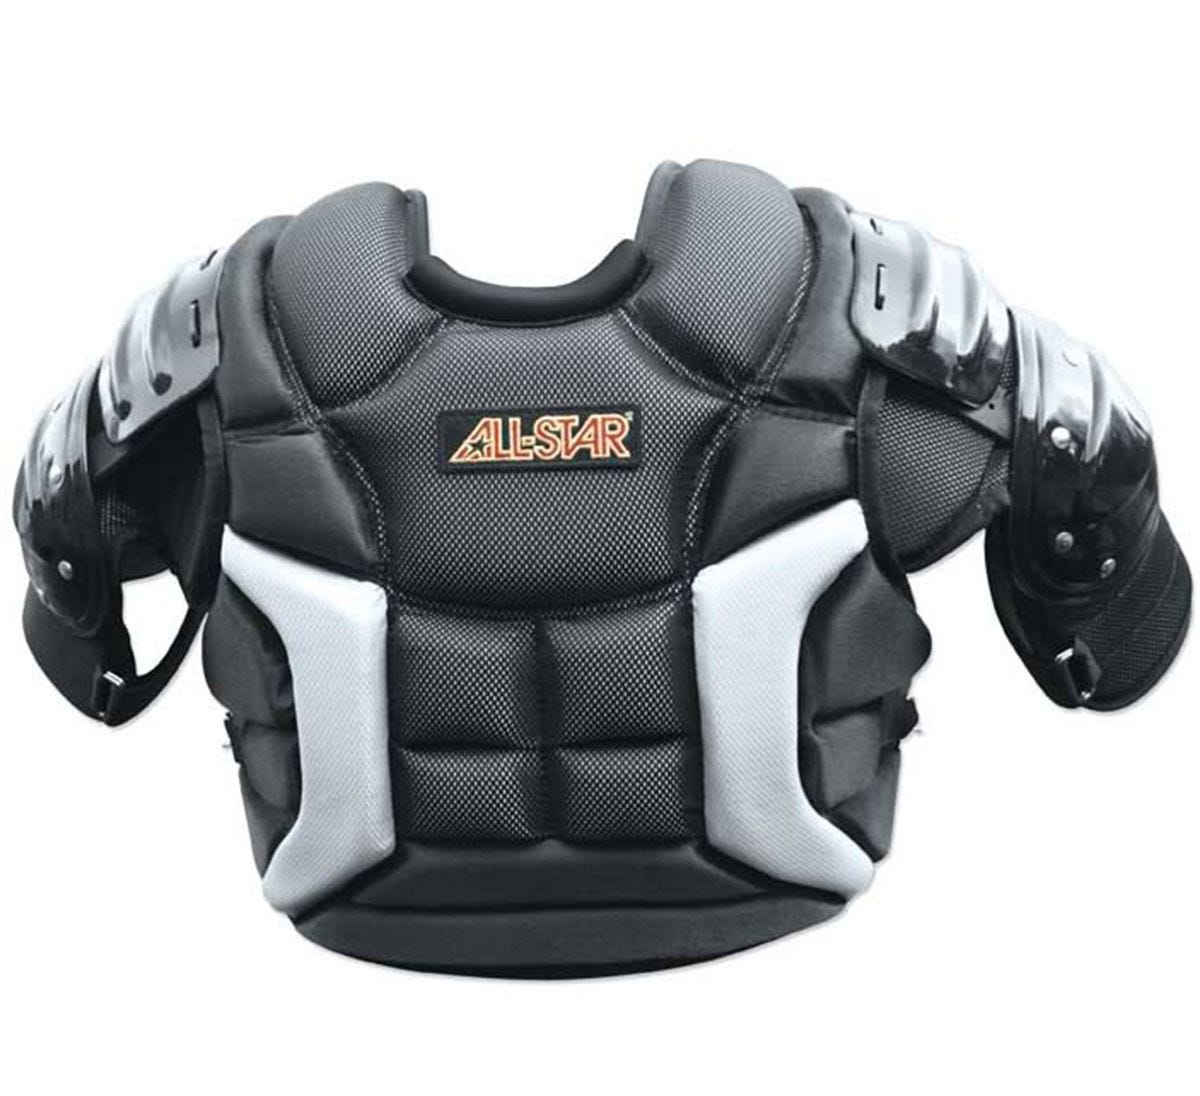 All Star CPU30 Umpire Chest Protector